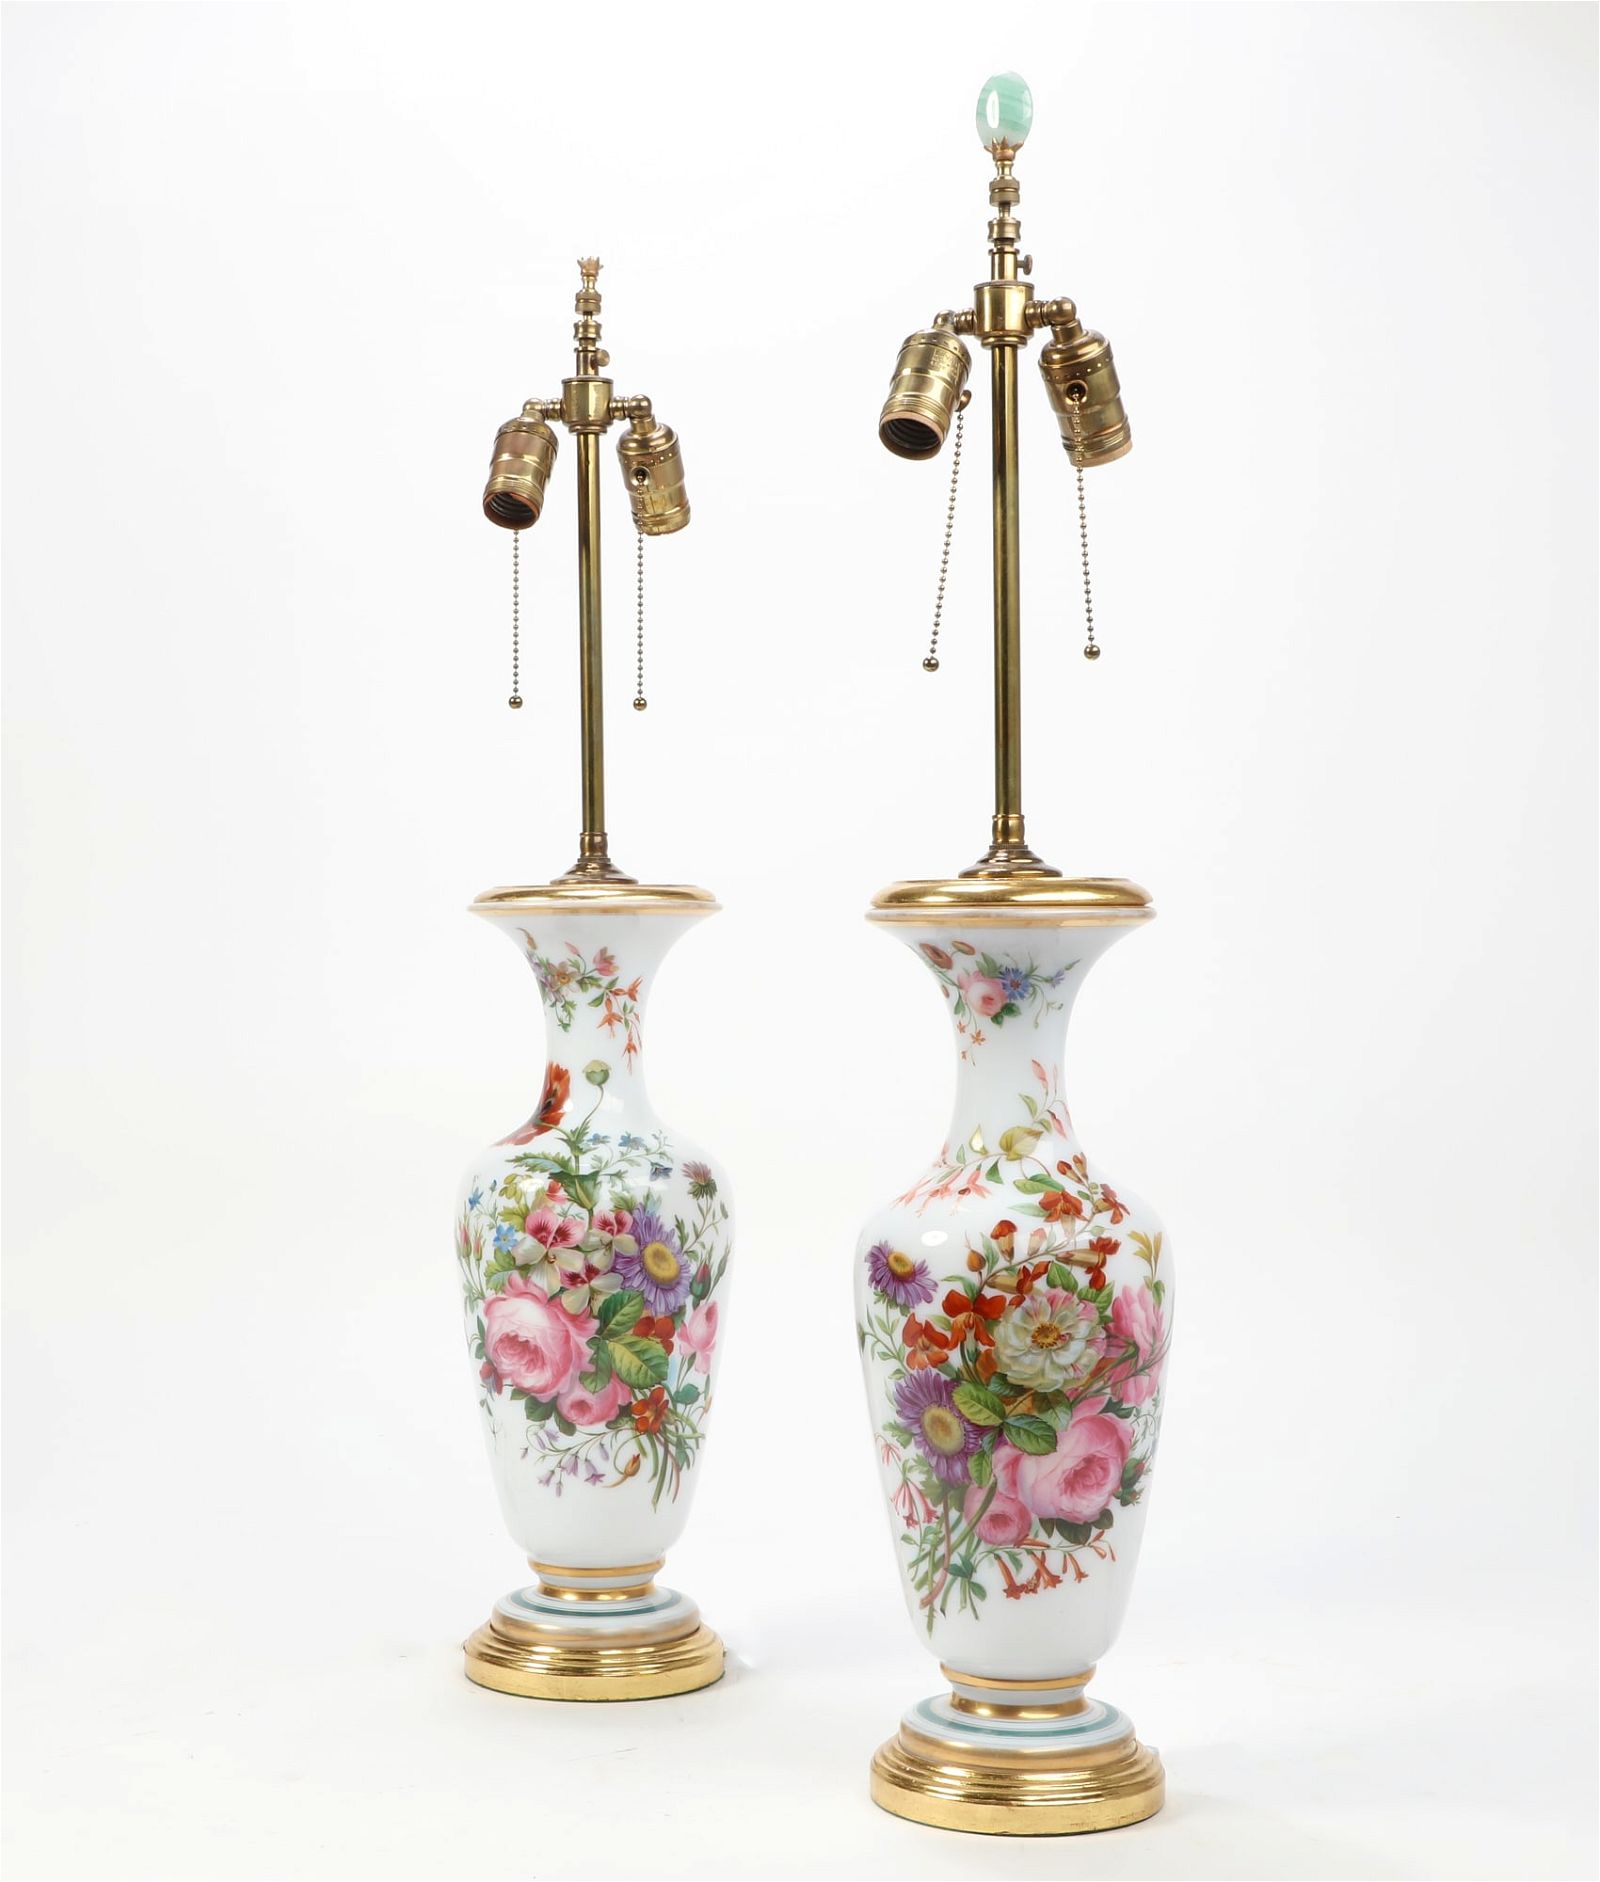 A PAIR OF FRENCH PORCELAIN VASES 2fb2db3